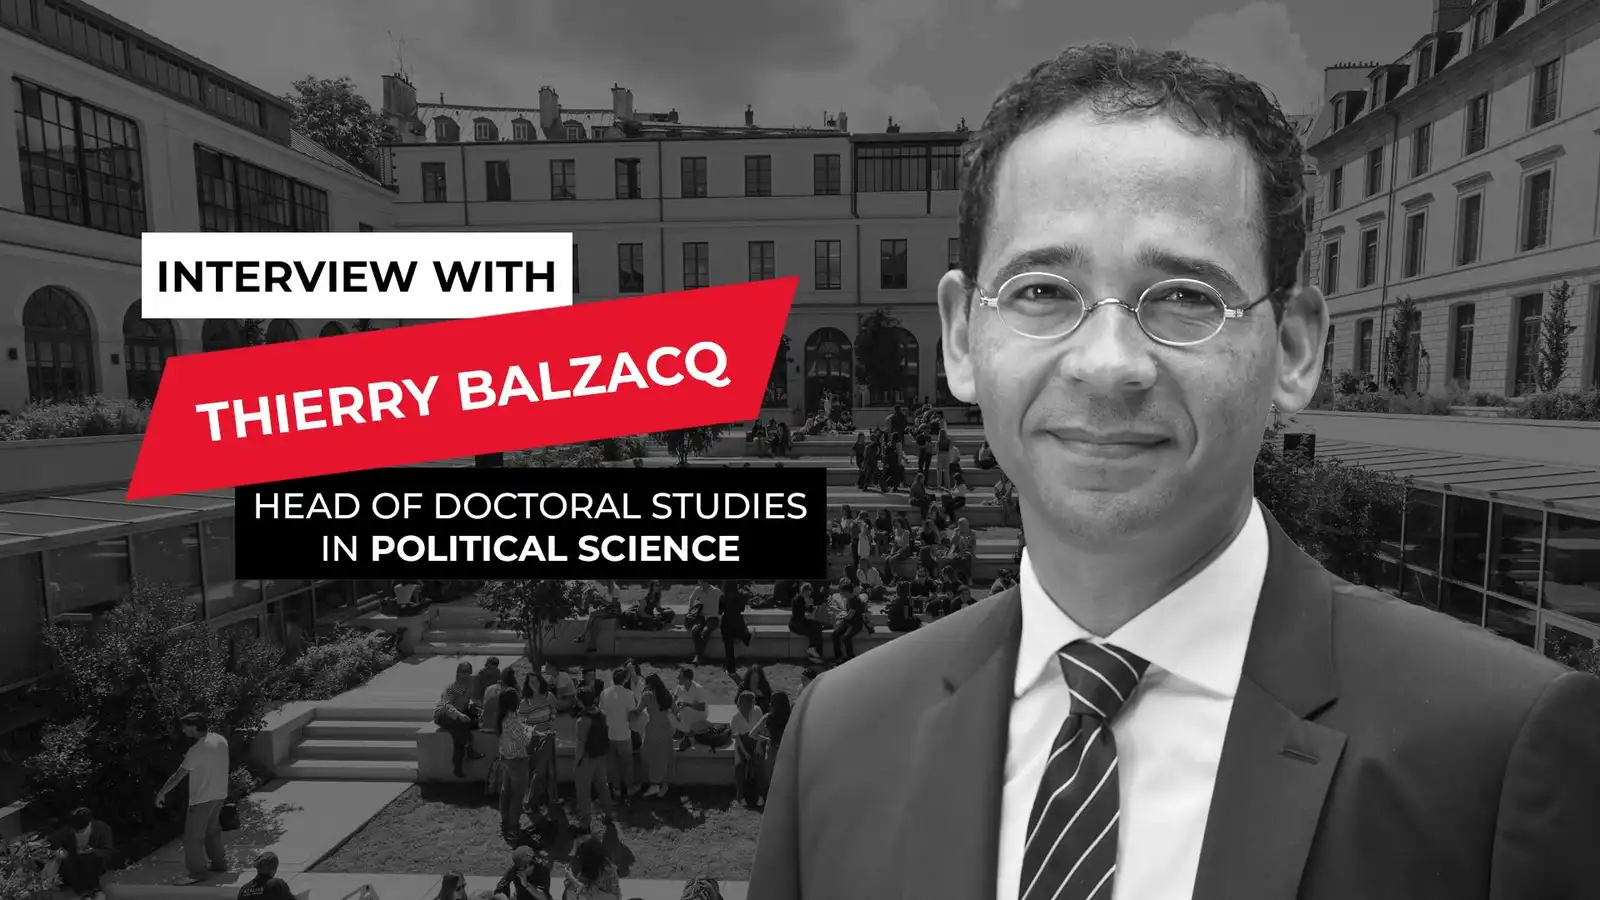 Interview with, Thierry Balzacq, head of doctoral studies in political science